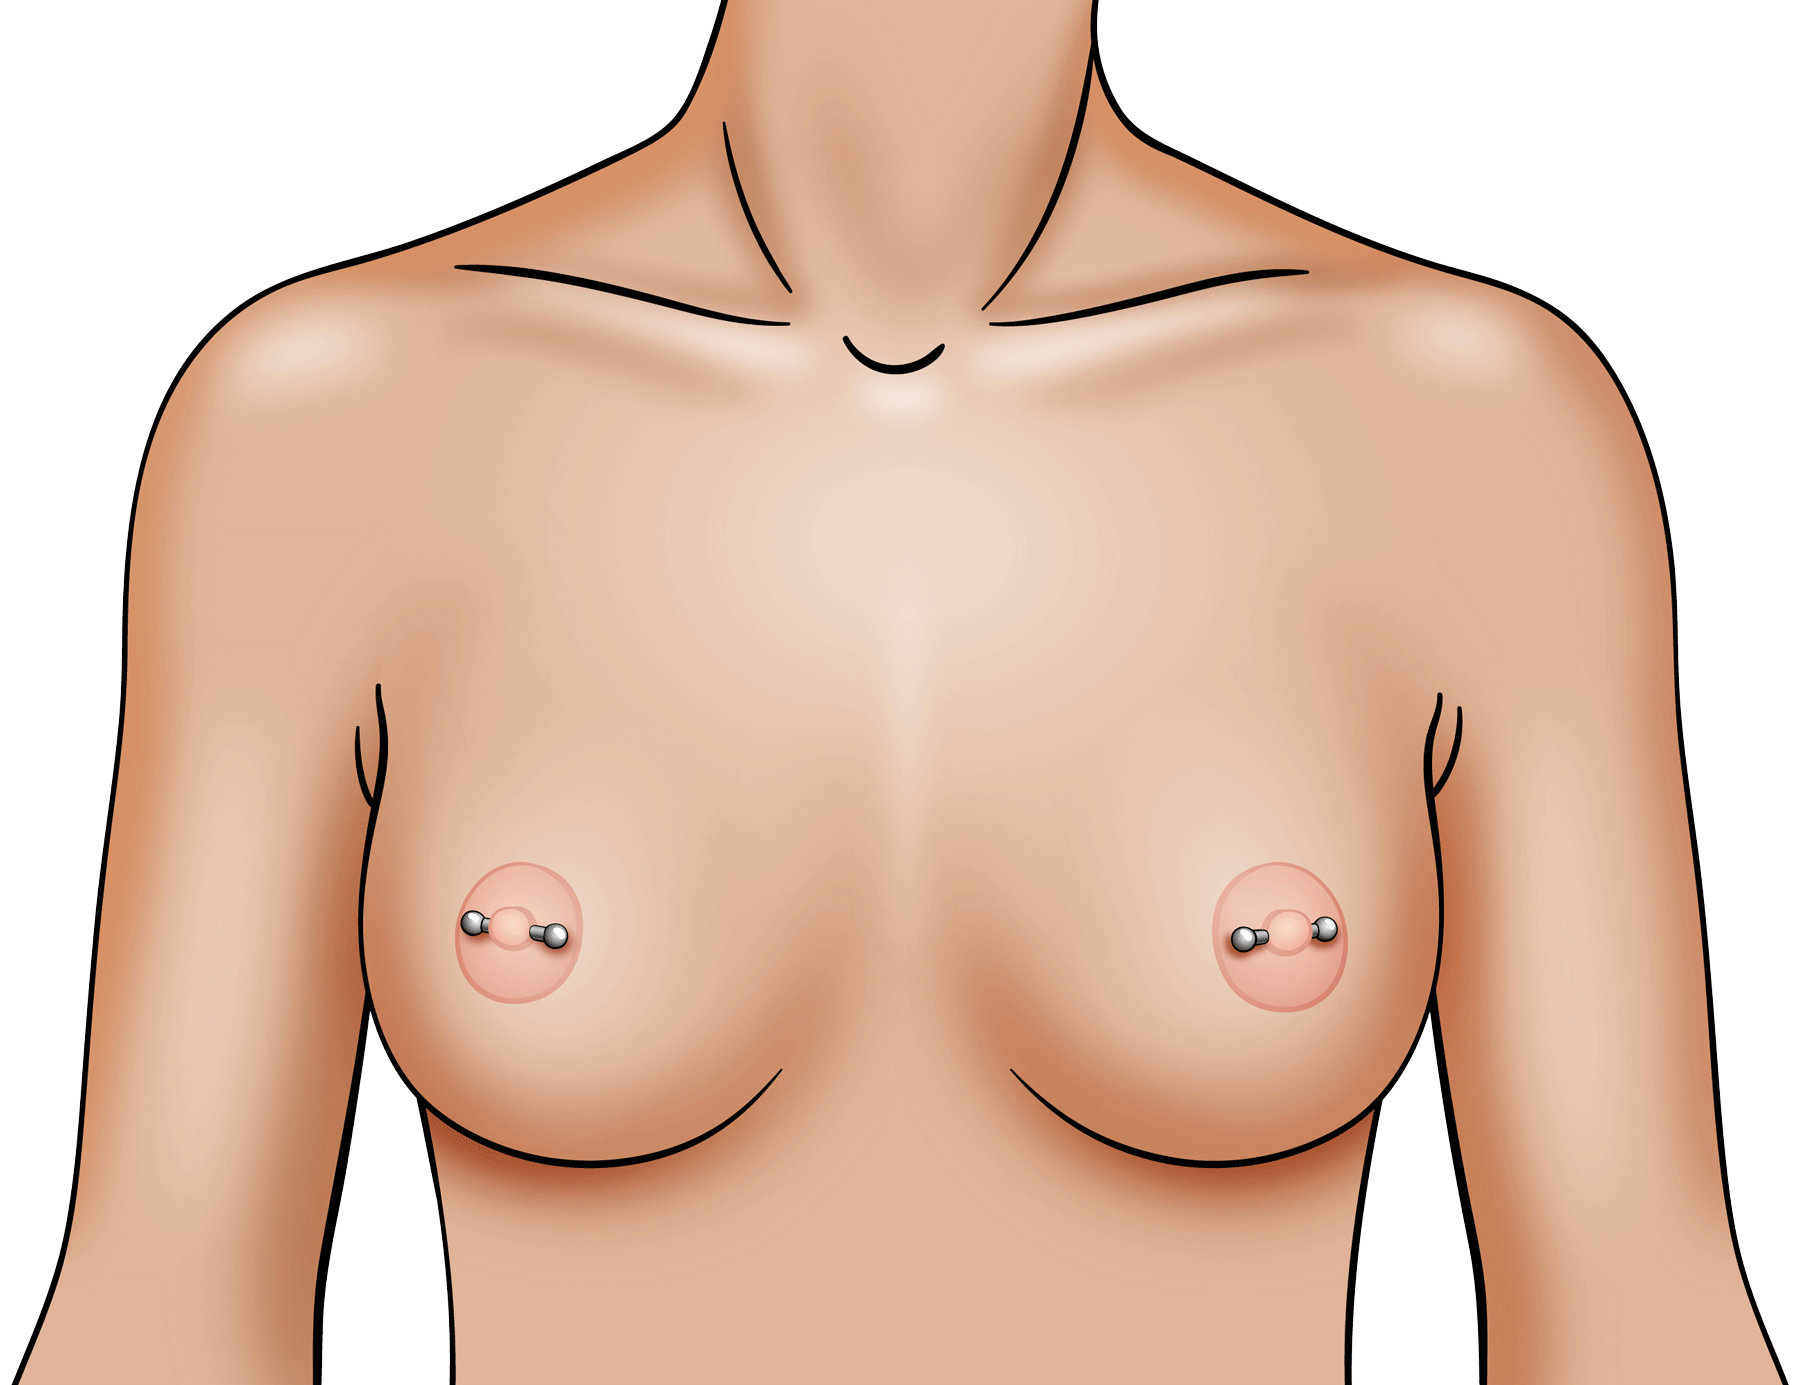 ameer zidan recommends fake tits pierced nipples pic